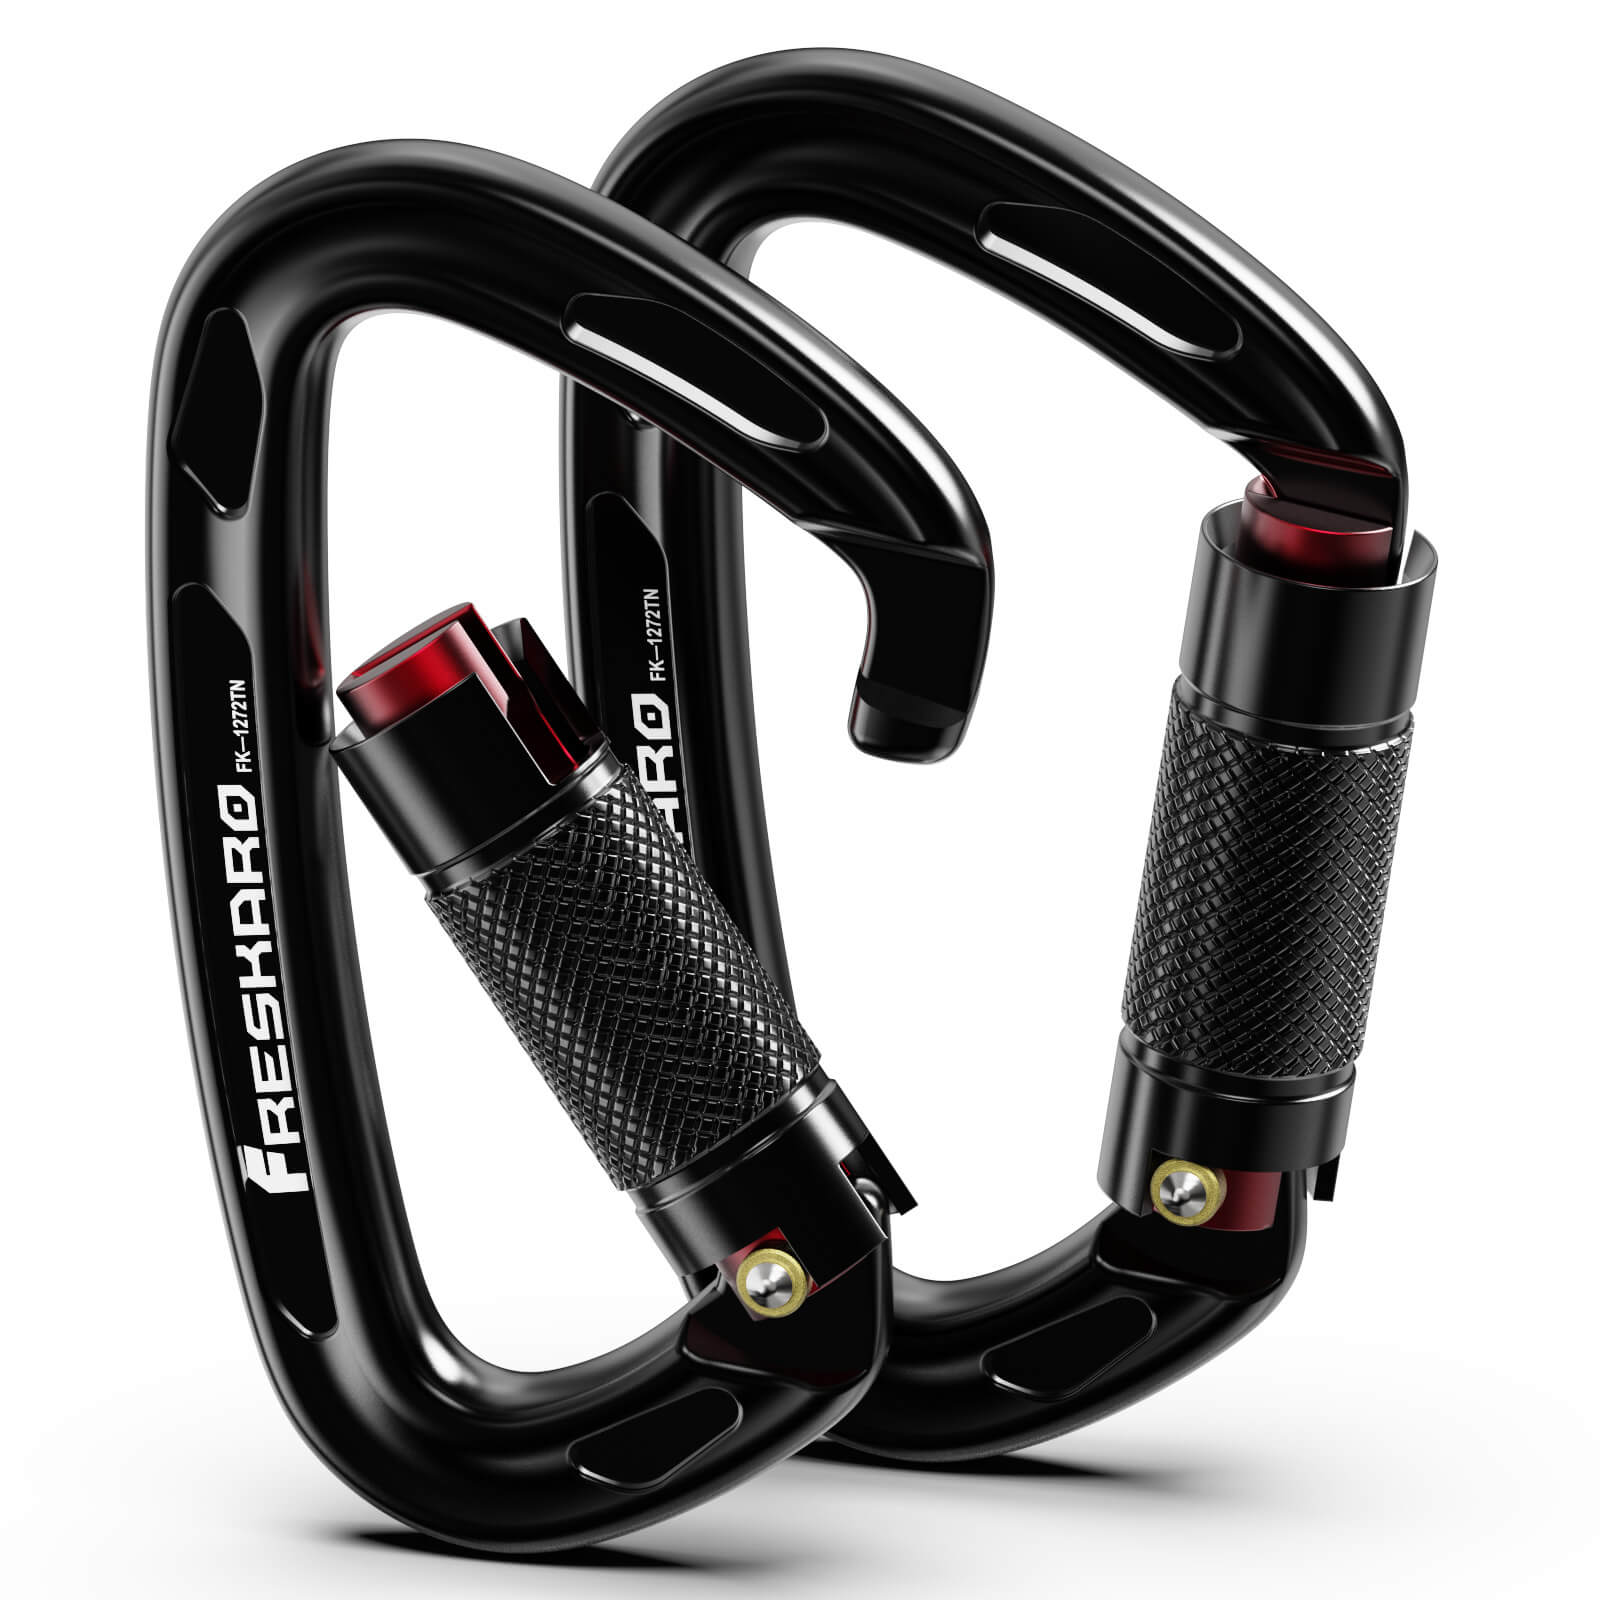 Climbing Carabiner Essentials: Trustworthy Carabiners for Climbers